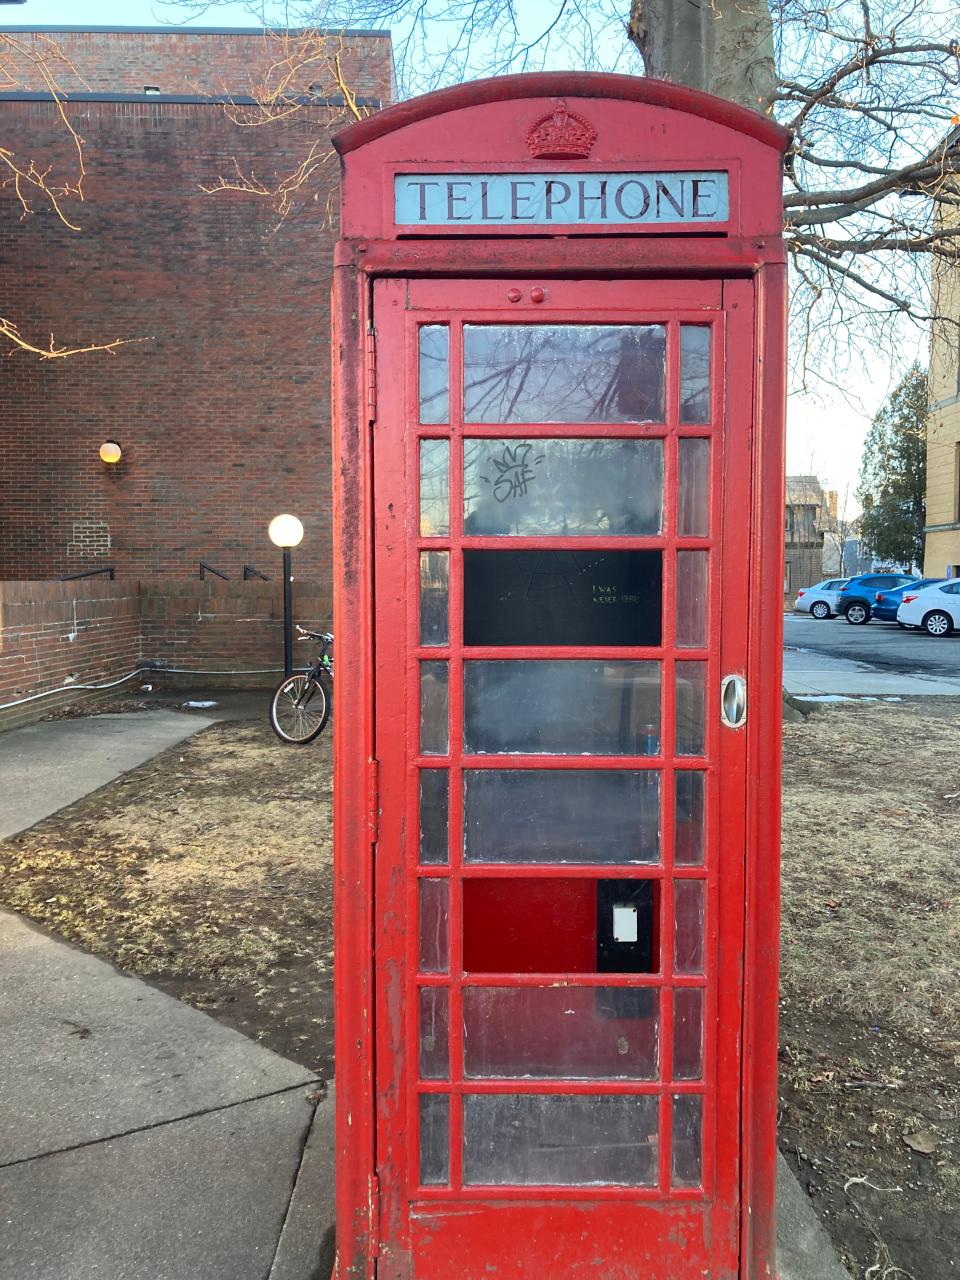 The city of Portsmouth is looking to have a run-down British red telephone booth, gifted by leaders from Portsmouth, England in 1984, outside the Portsmouth Historical Society, repaired and returned to the city this summer.